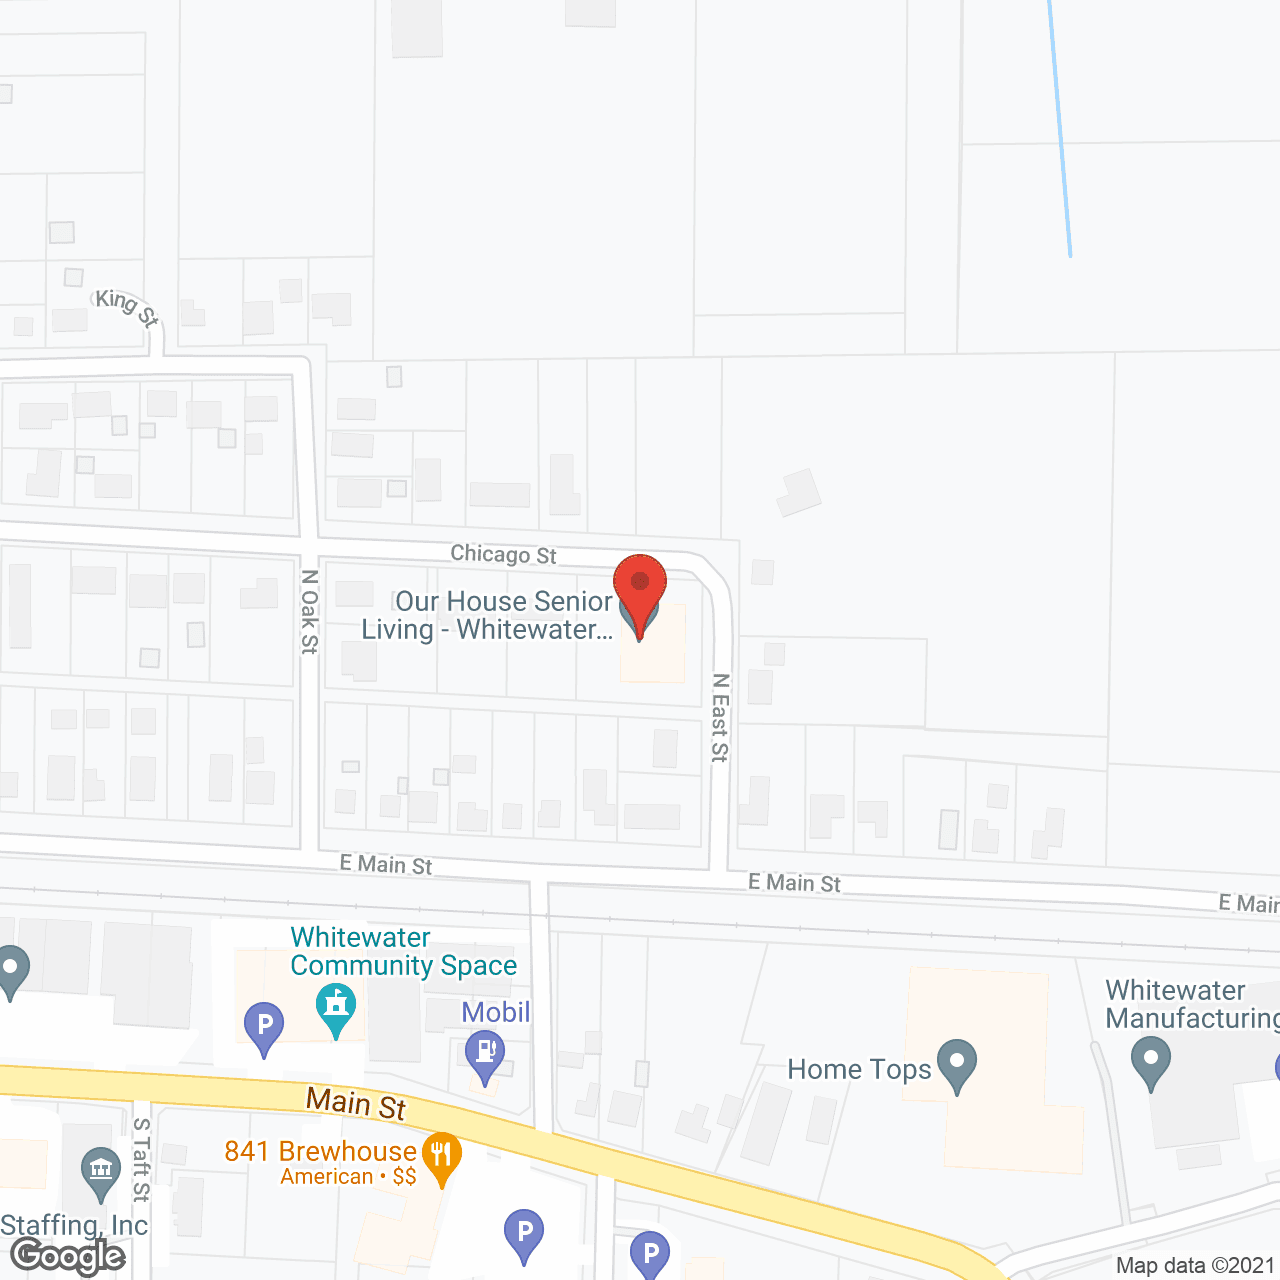 Our House Senior Living Memory Care - Whitewater in google map